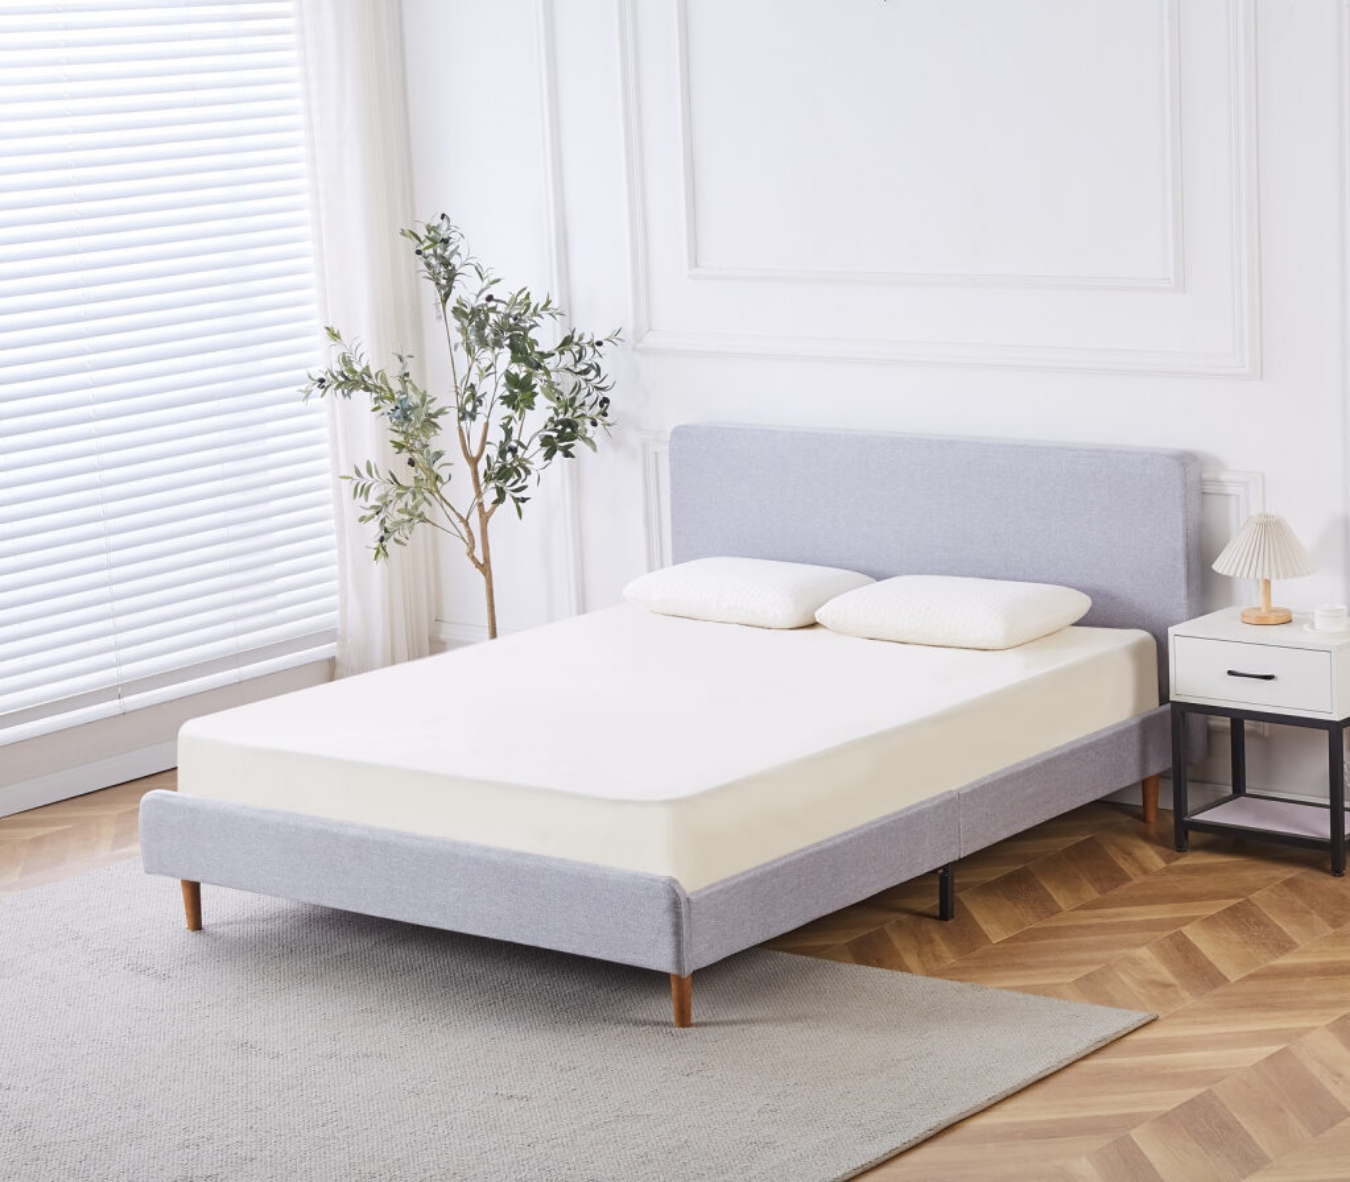 The Bendigo Bed Frame - Queen size is a stylish and practical addition to any bedroom.